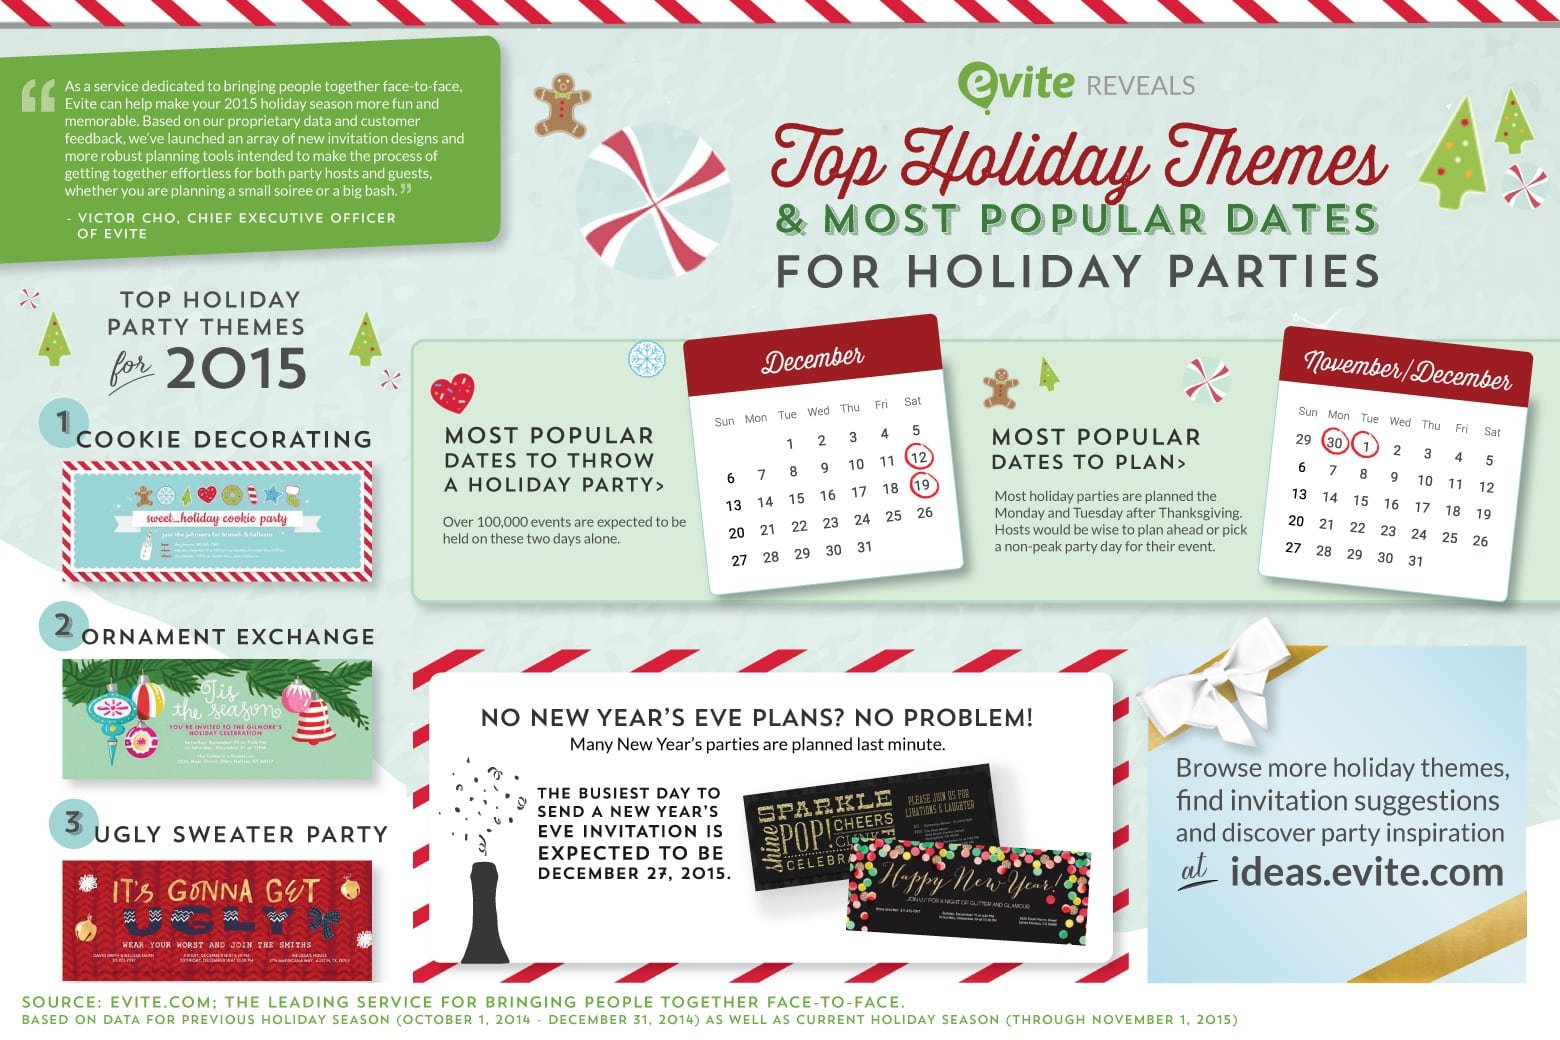 Top 10 Holiday Themes For 2015; Most Popular Dates To Plan Throw